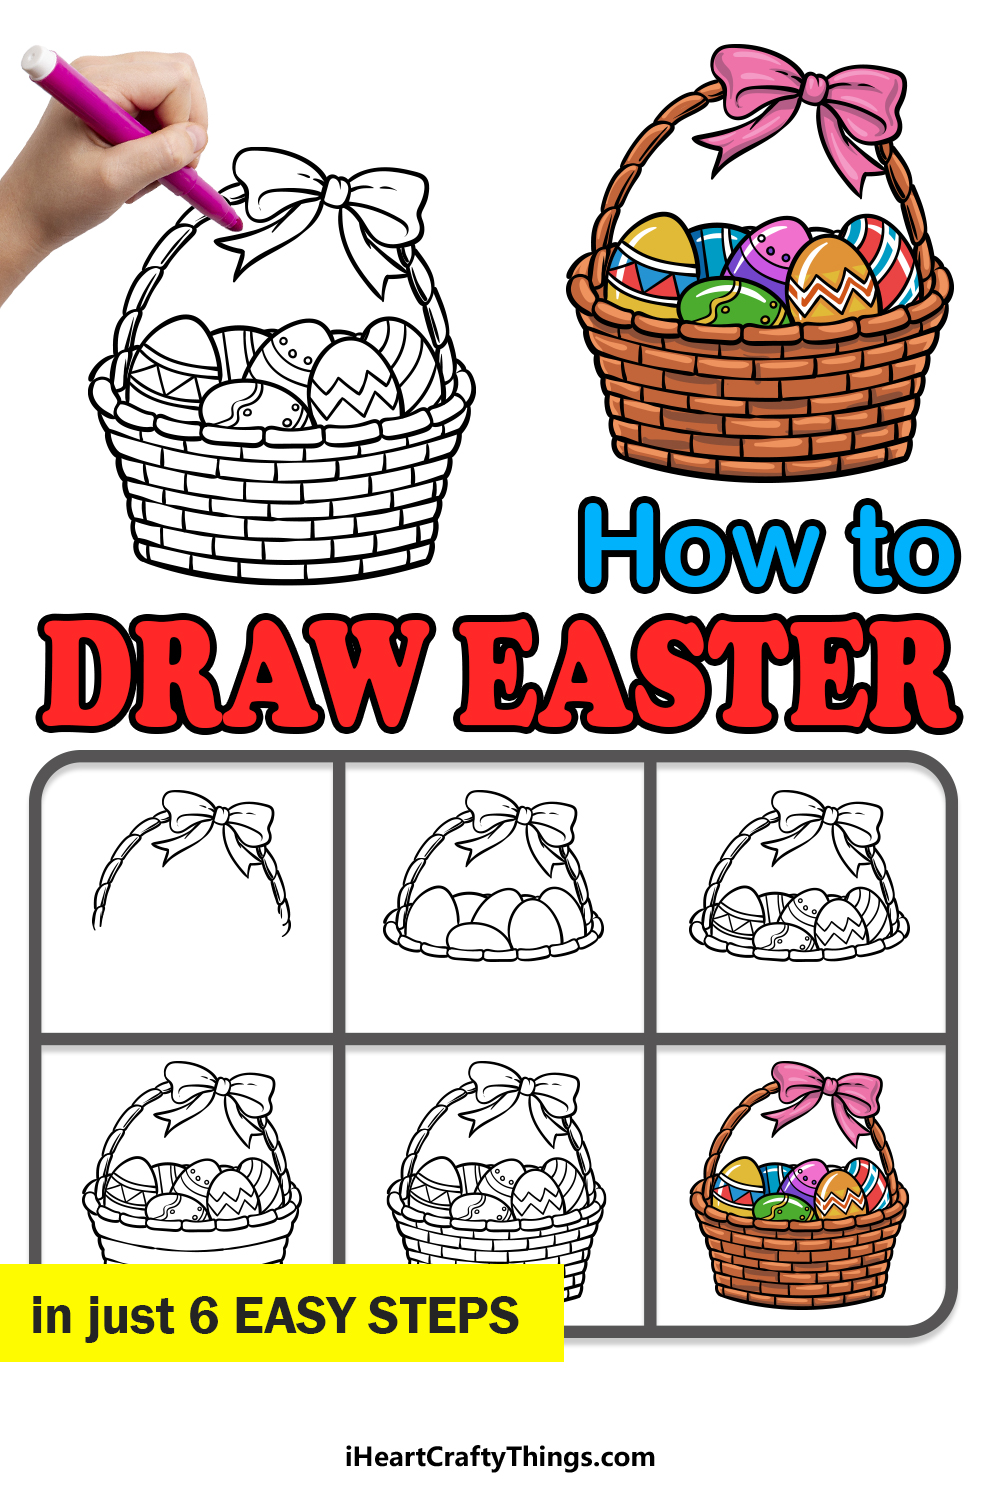 how to draw Easter in 6 easy steps